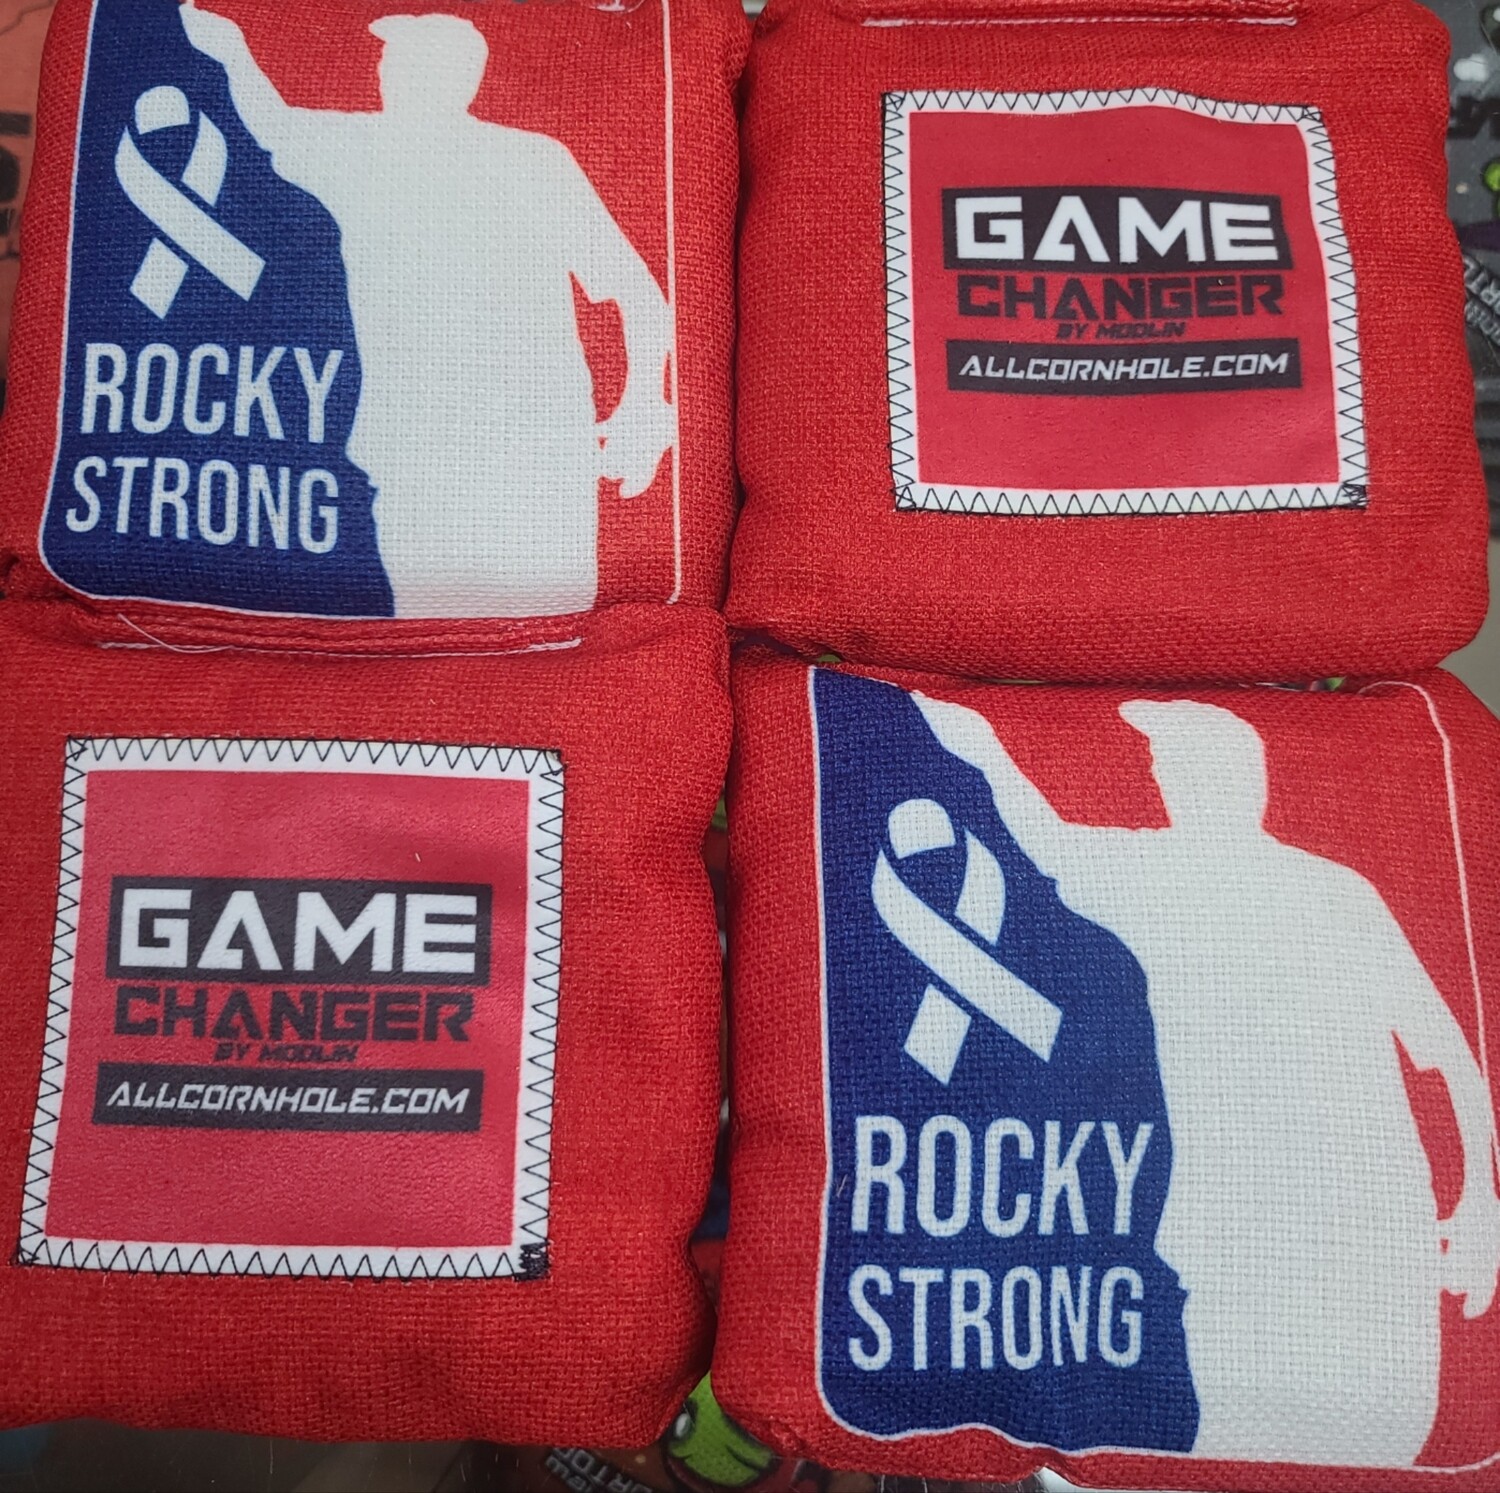 Special edition red Rocky Strong Gamechangers